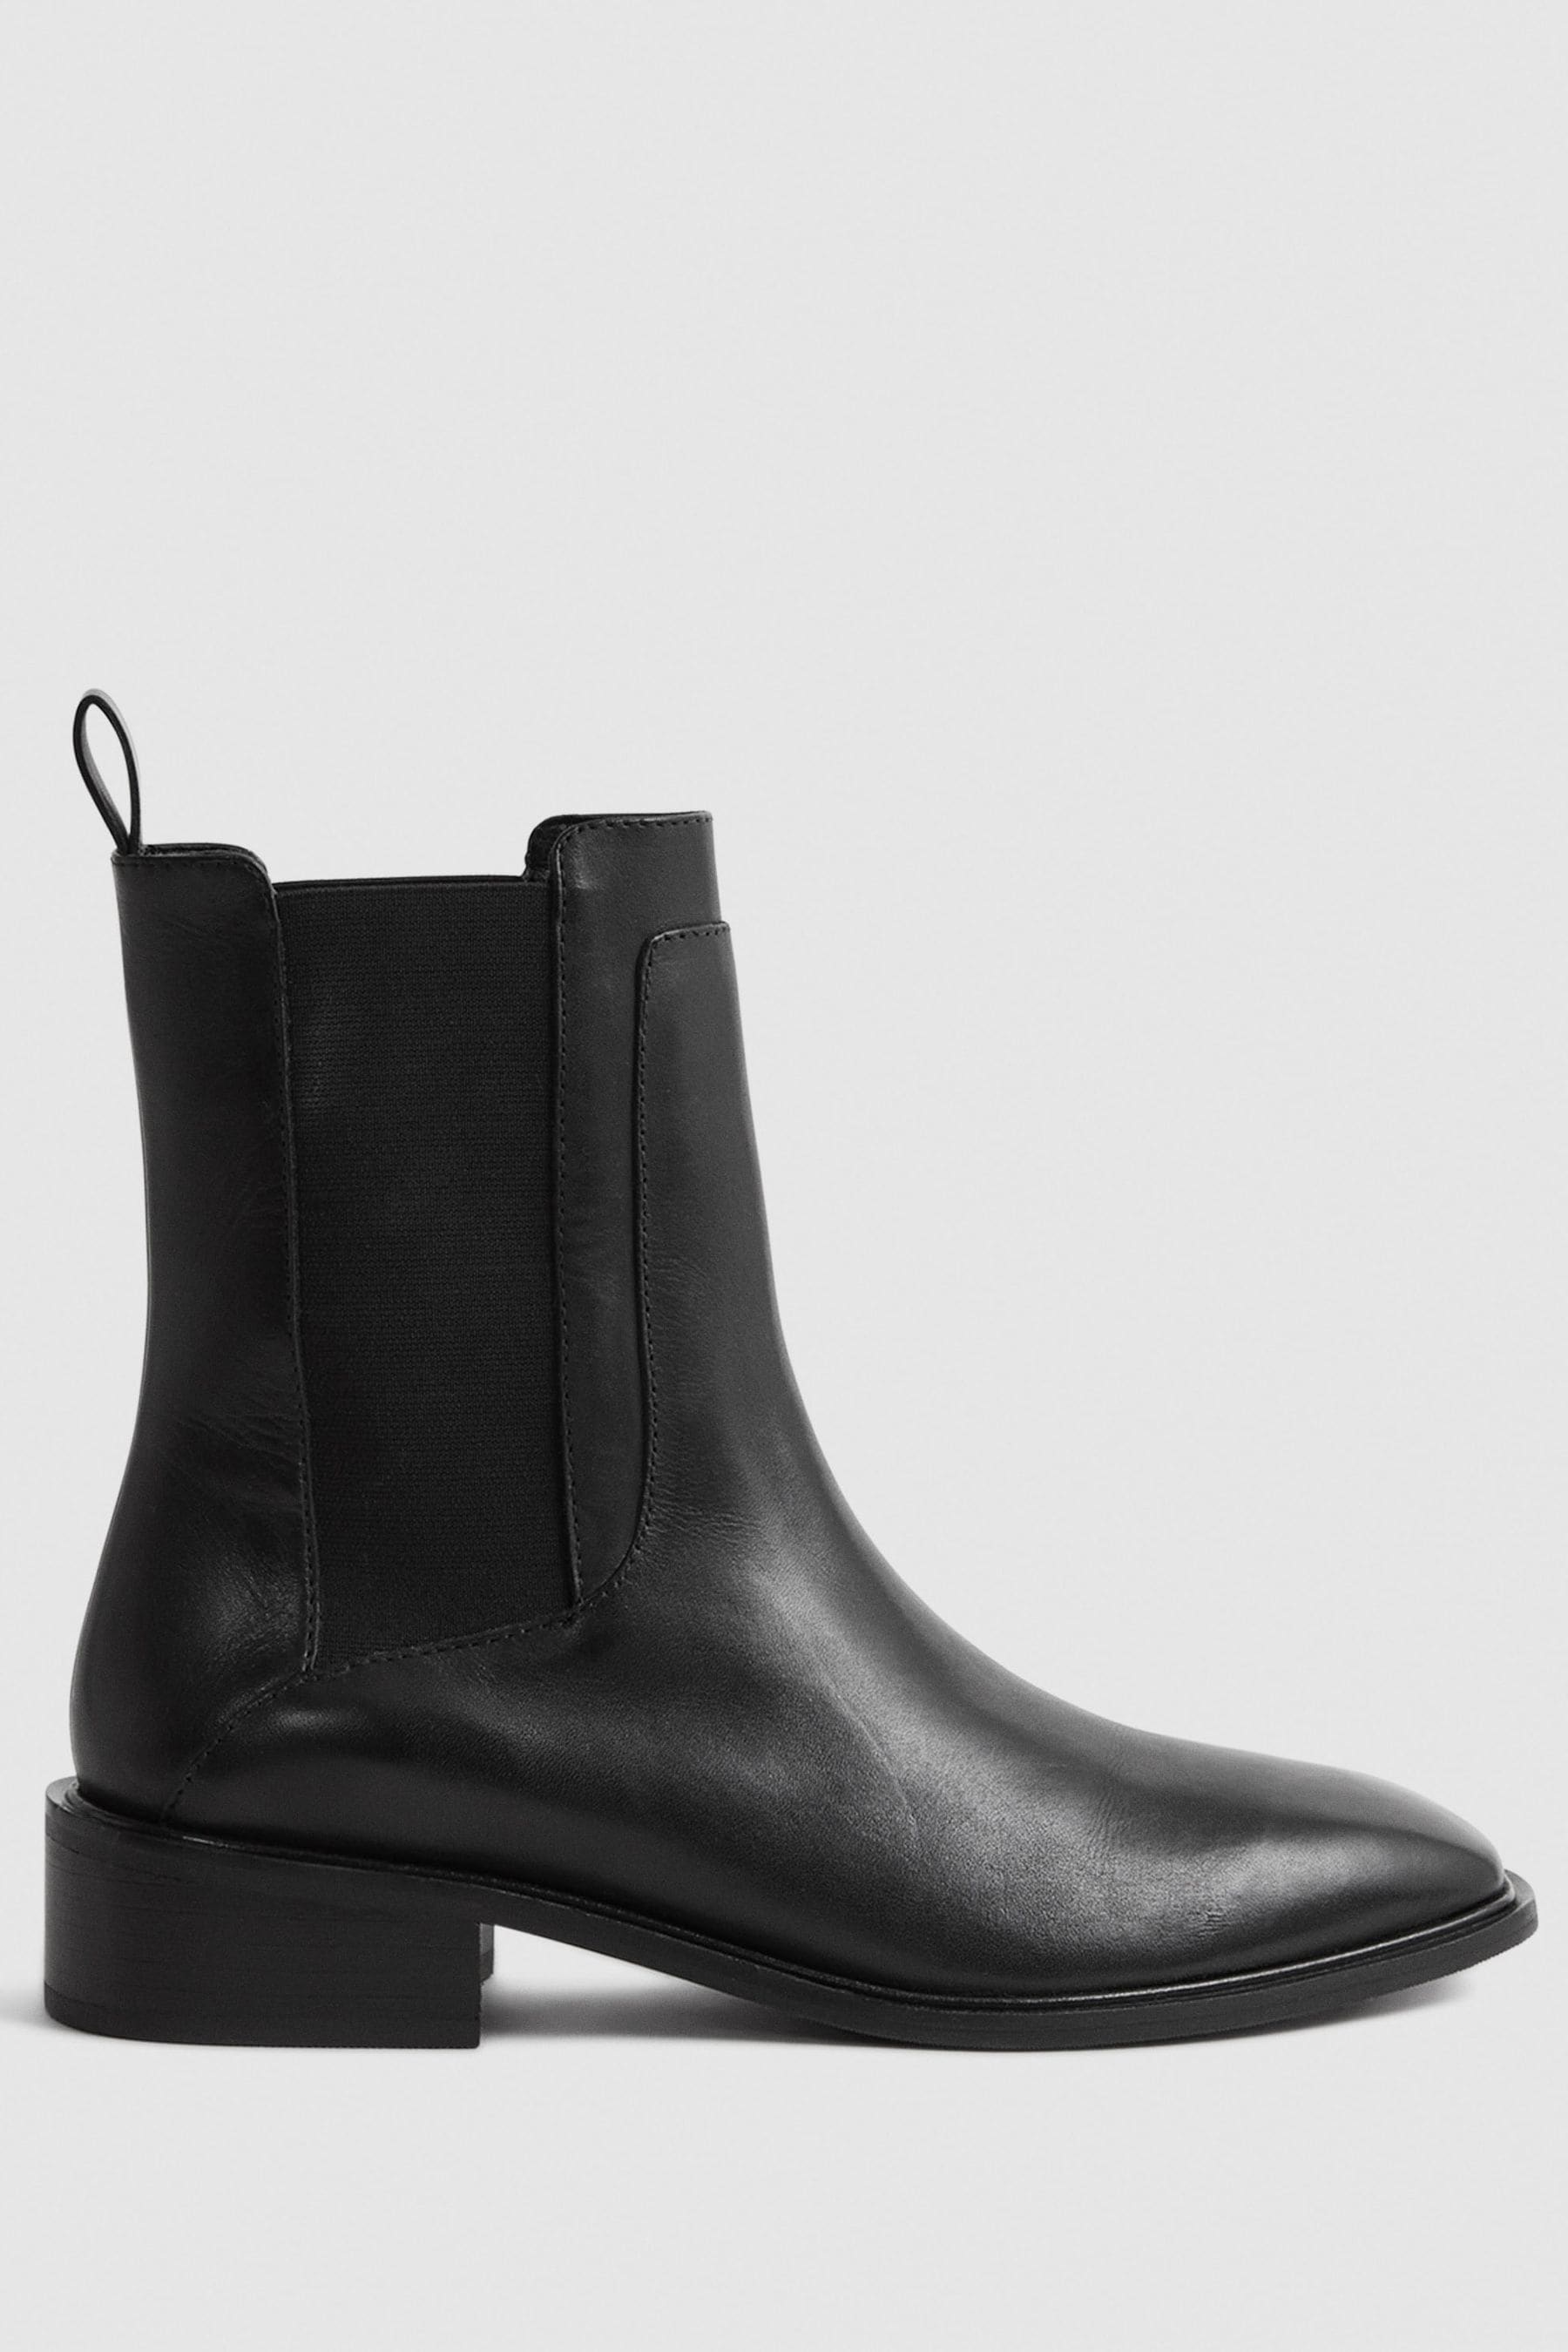 Reiss Willow - Black Leather Chelsea Boots, Us 6